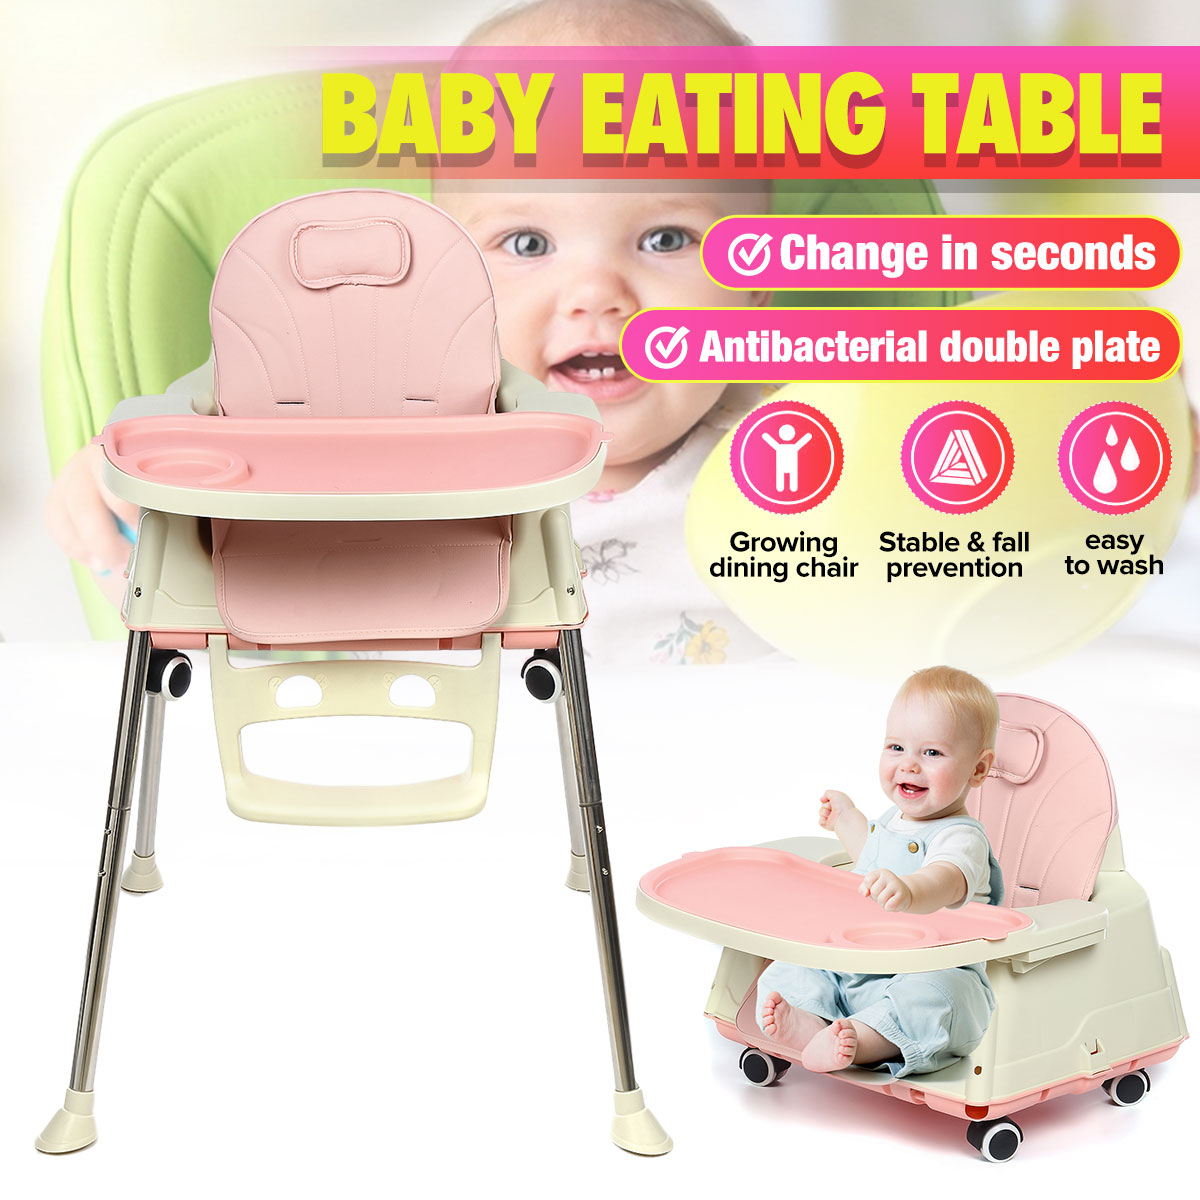 Childrens-Dining-Chair-Baby-Eating-Table-BB-Plastic-Multifunctional-Dining-Chair-Men-and-Women-Baby--1951925-2